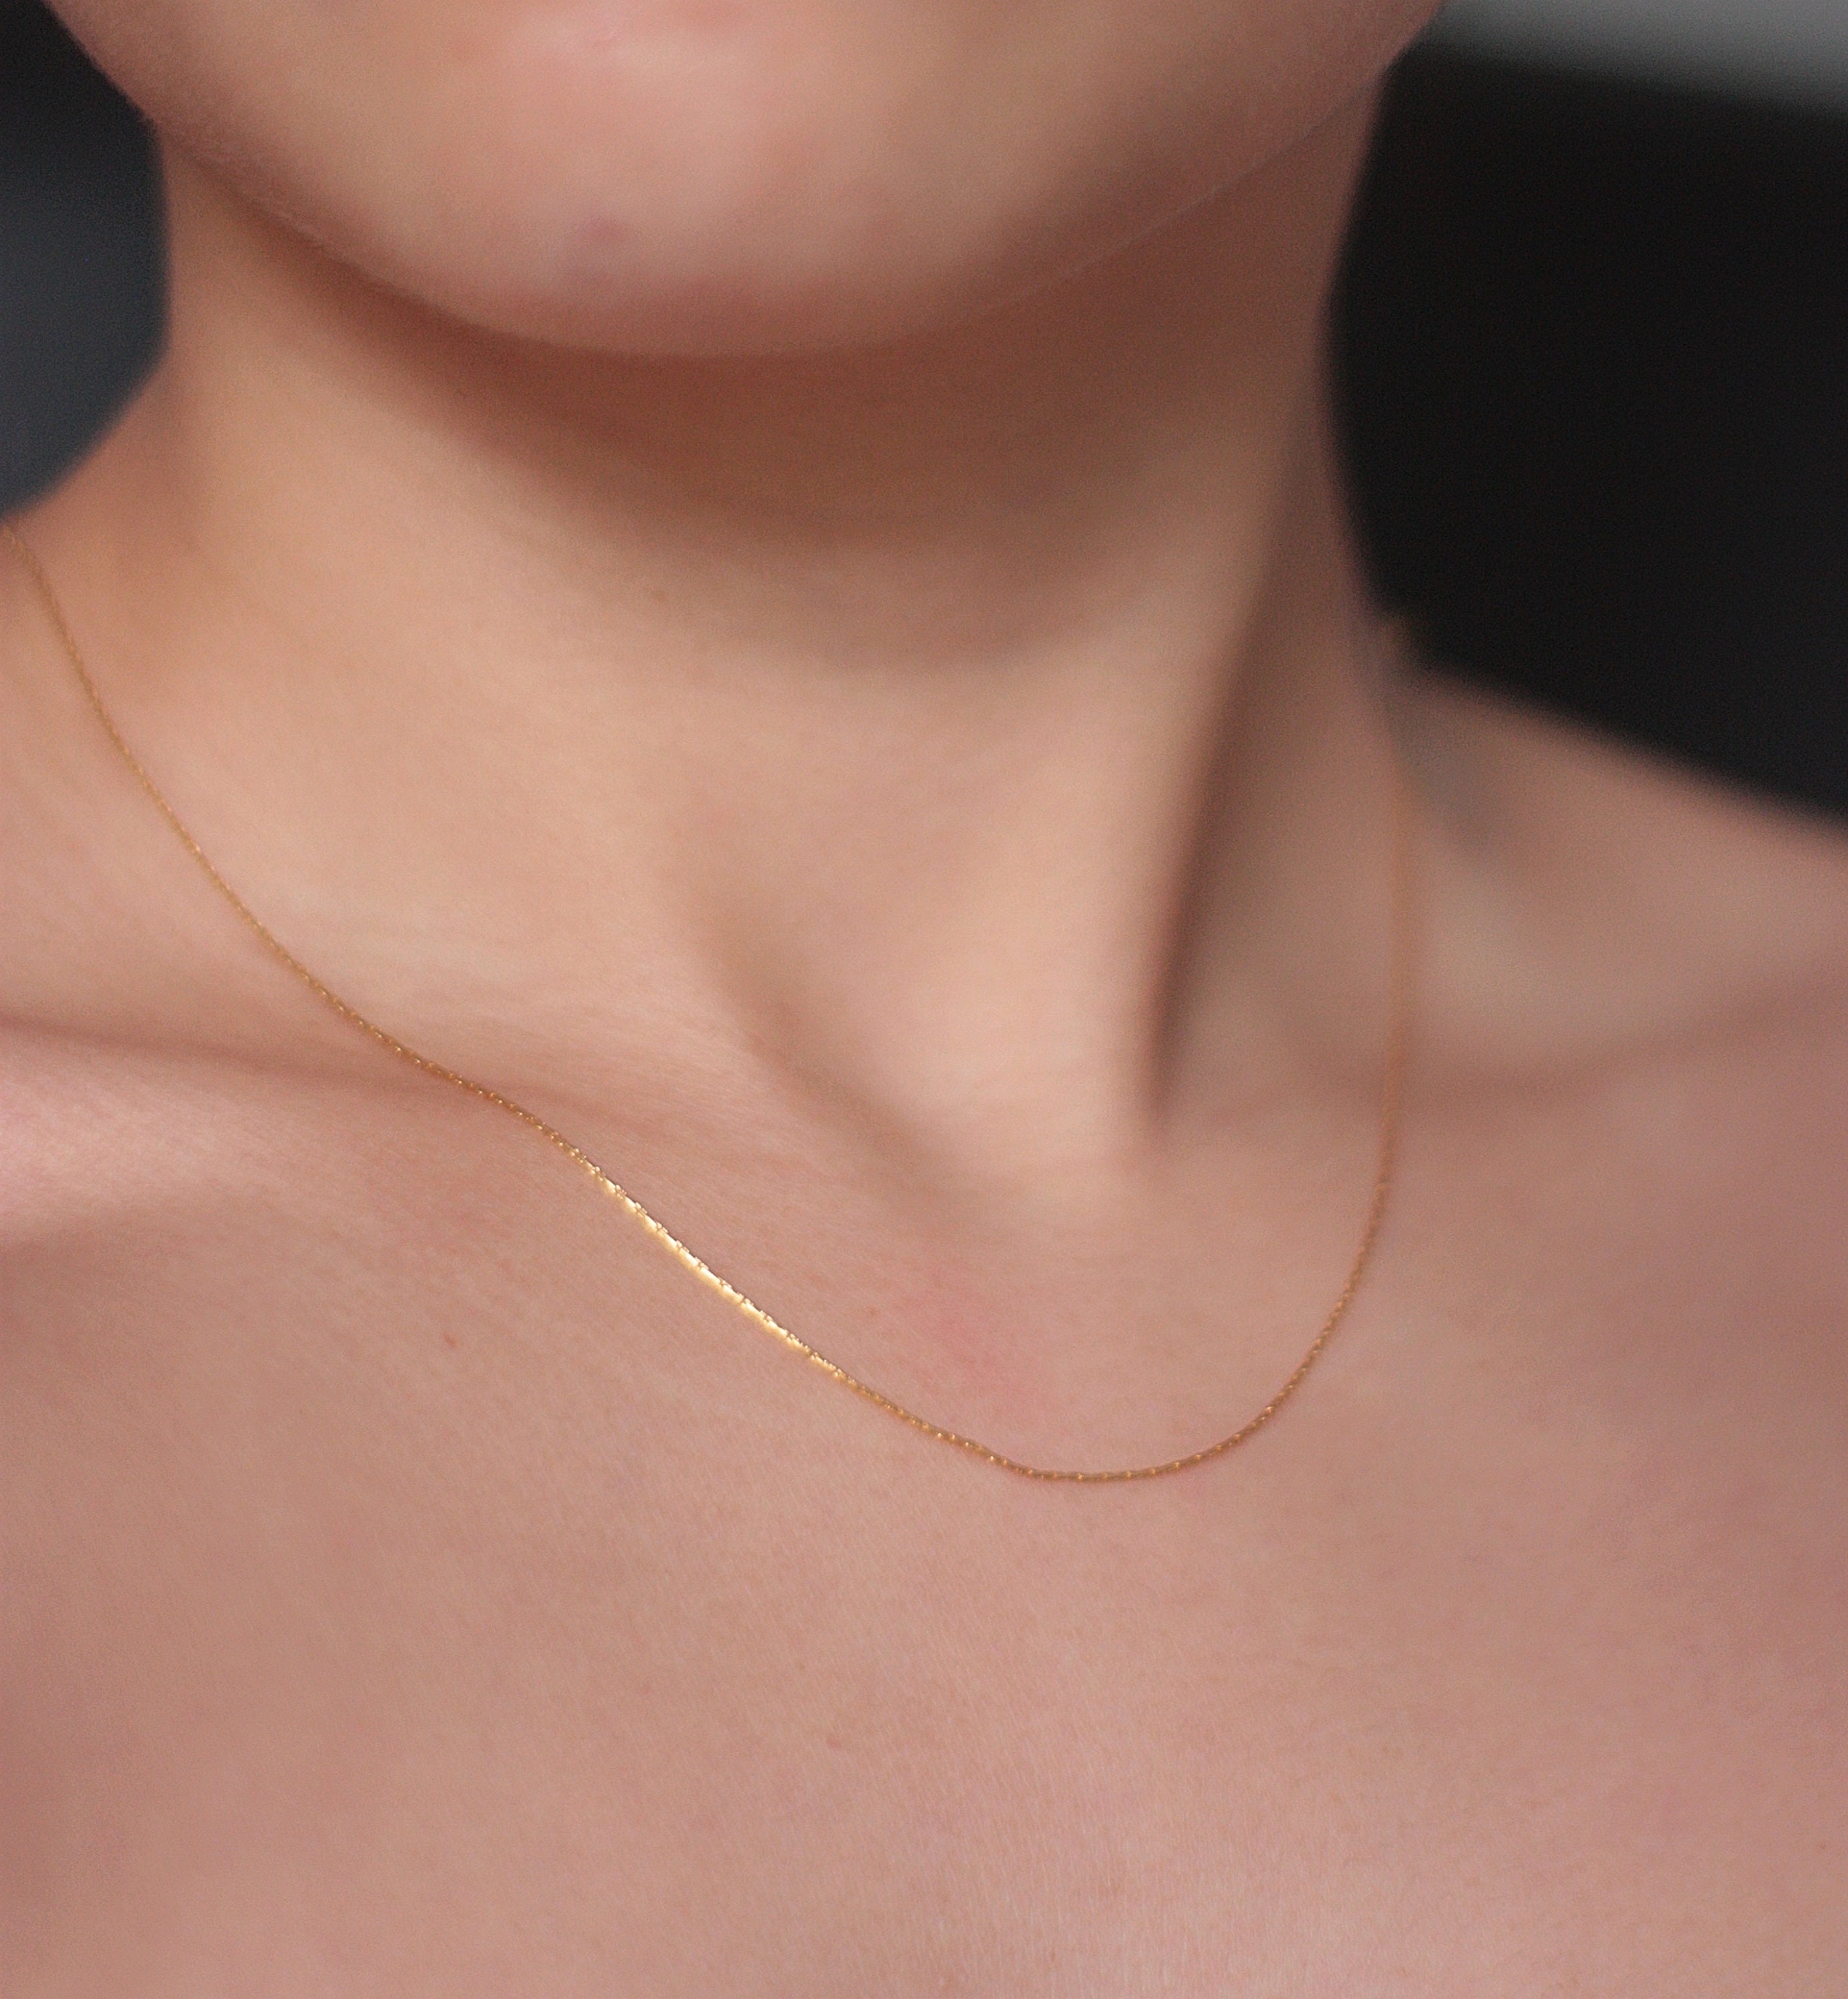 Gold Chain extension, 2 or 3 Inch gold necklace Extender